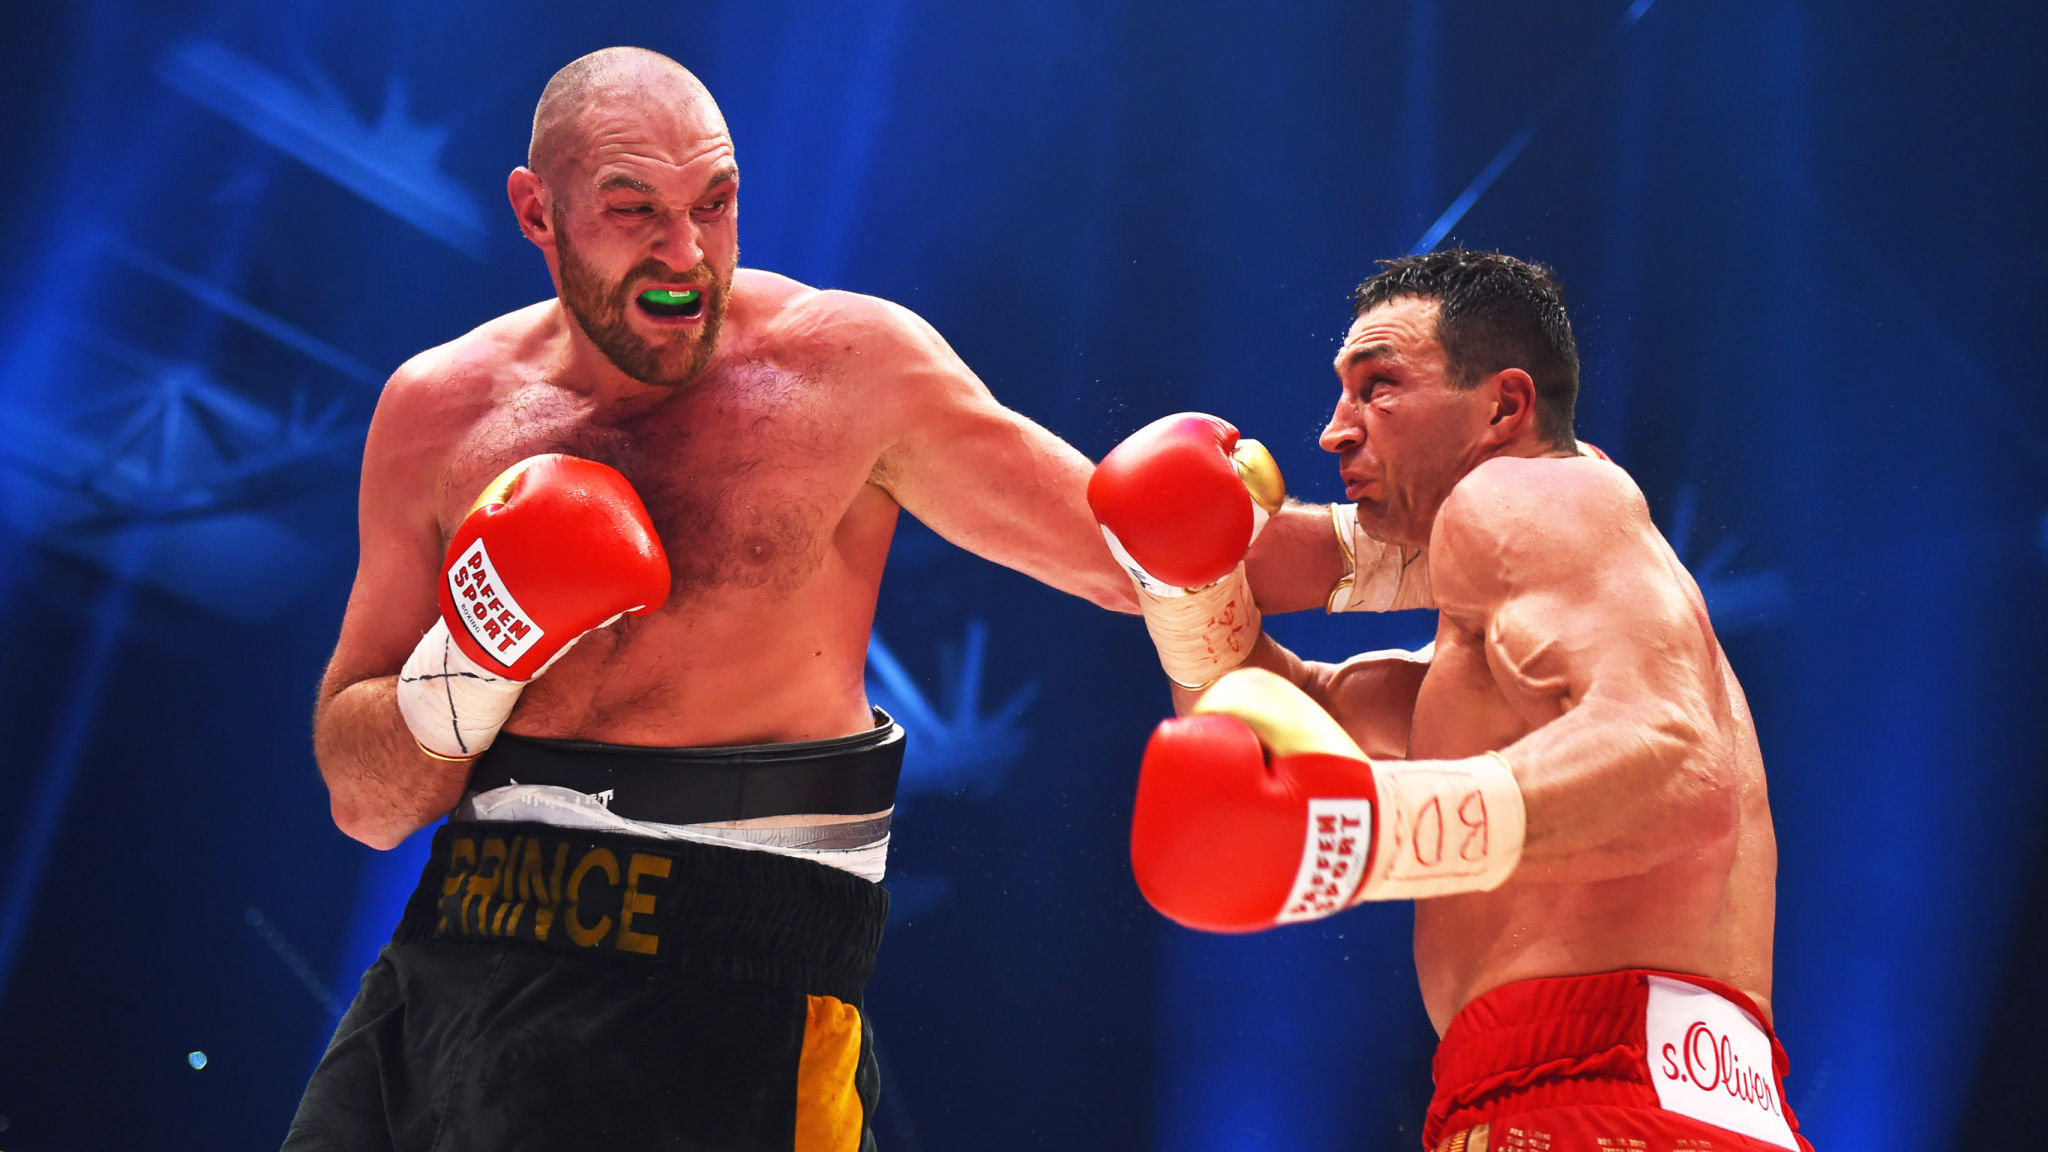 Tyson Fury has not fought since beating Wladimir Klitschko in a world title fight in November 2015 ©Getty Images